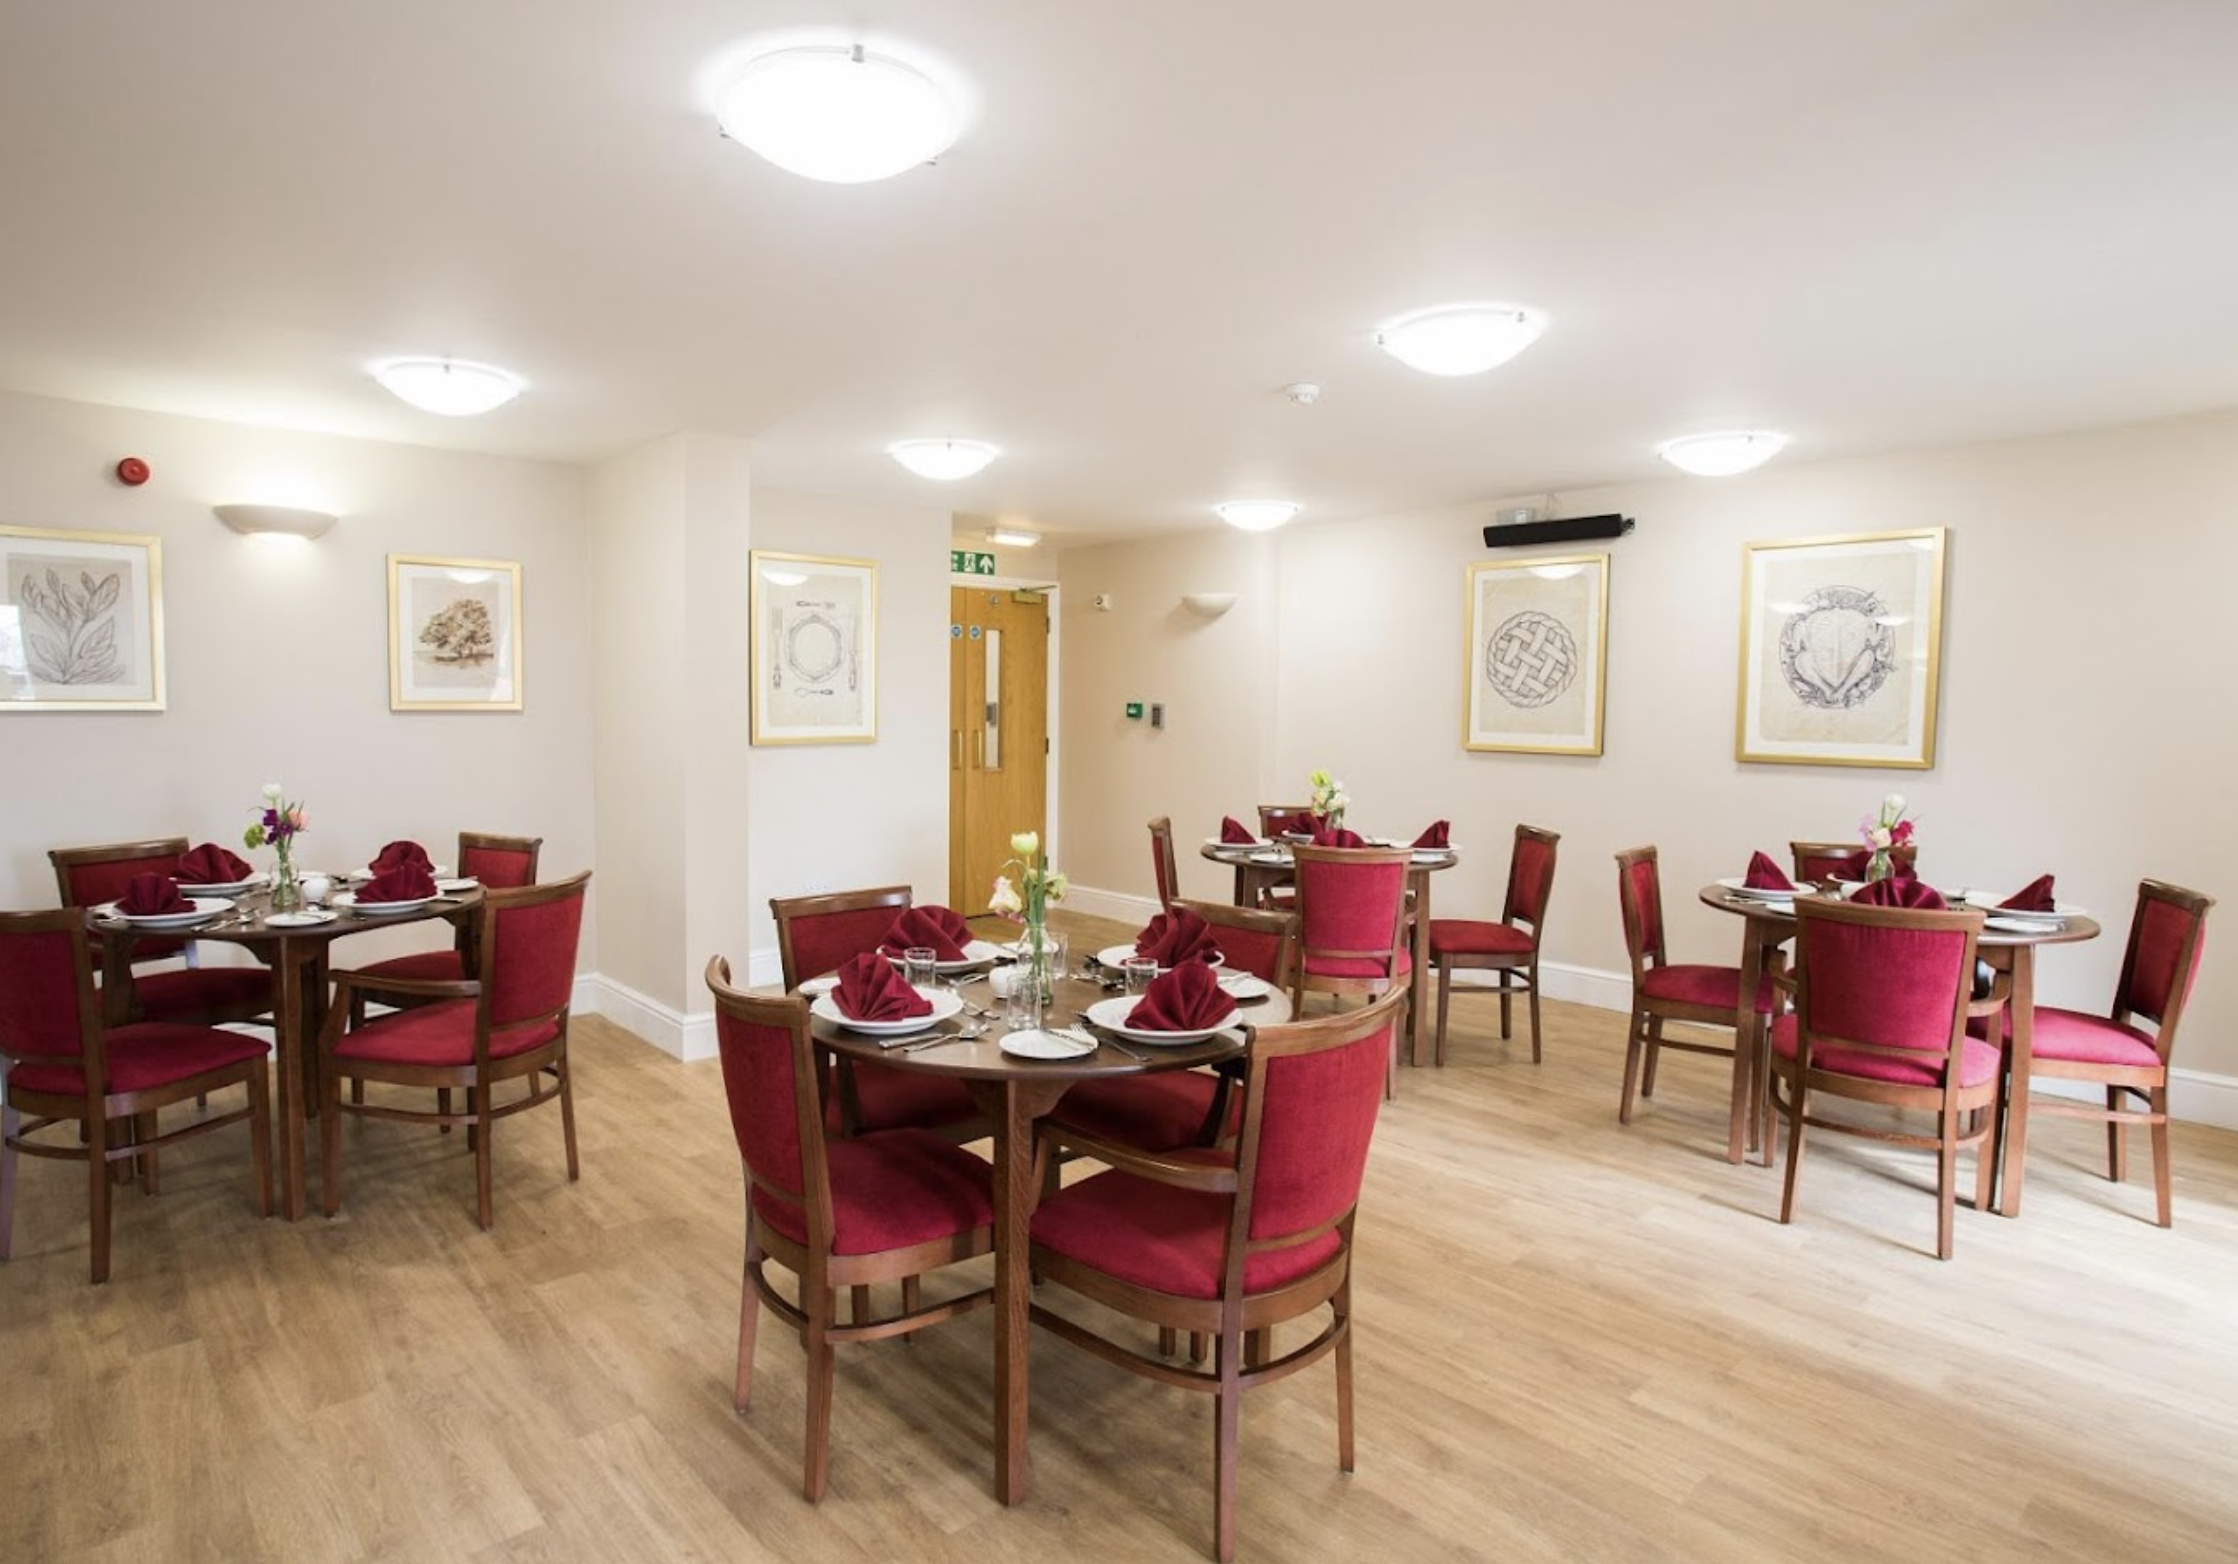 Dining room of Ardenlea Grove care home in Solihull, West Midlands